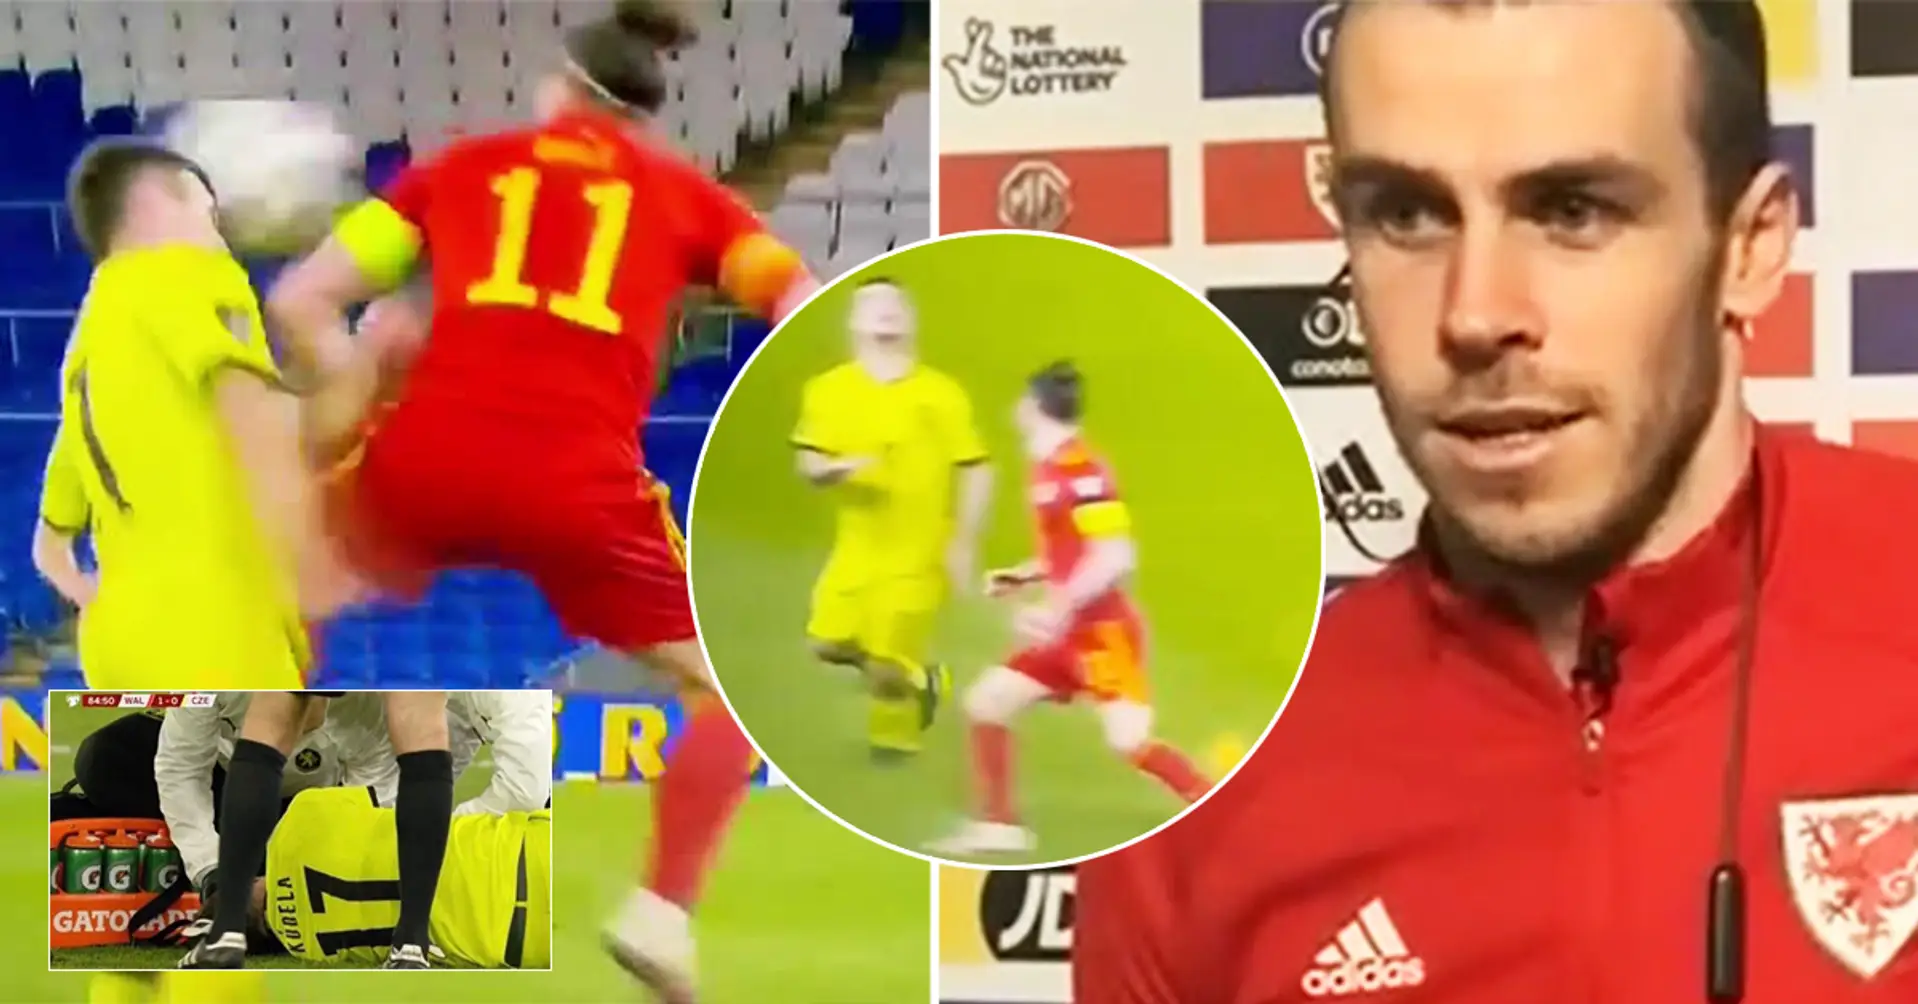 Gareth Bale elbows 'racist' Slavia player in the face, looks right in his eyes seconds before doing it